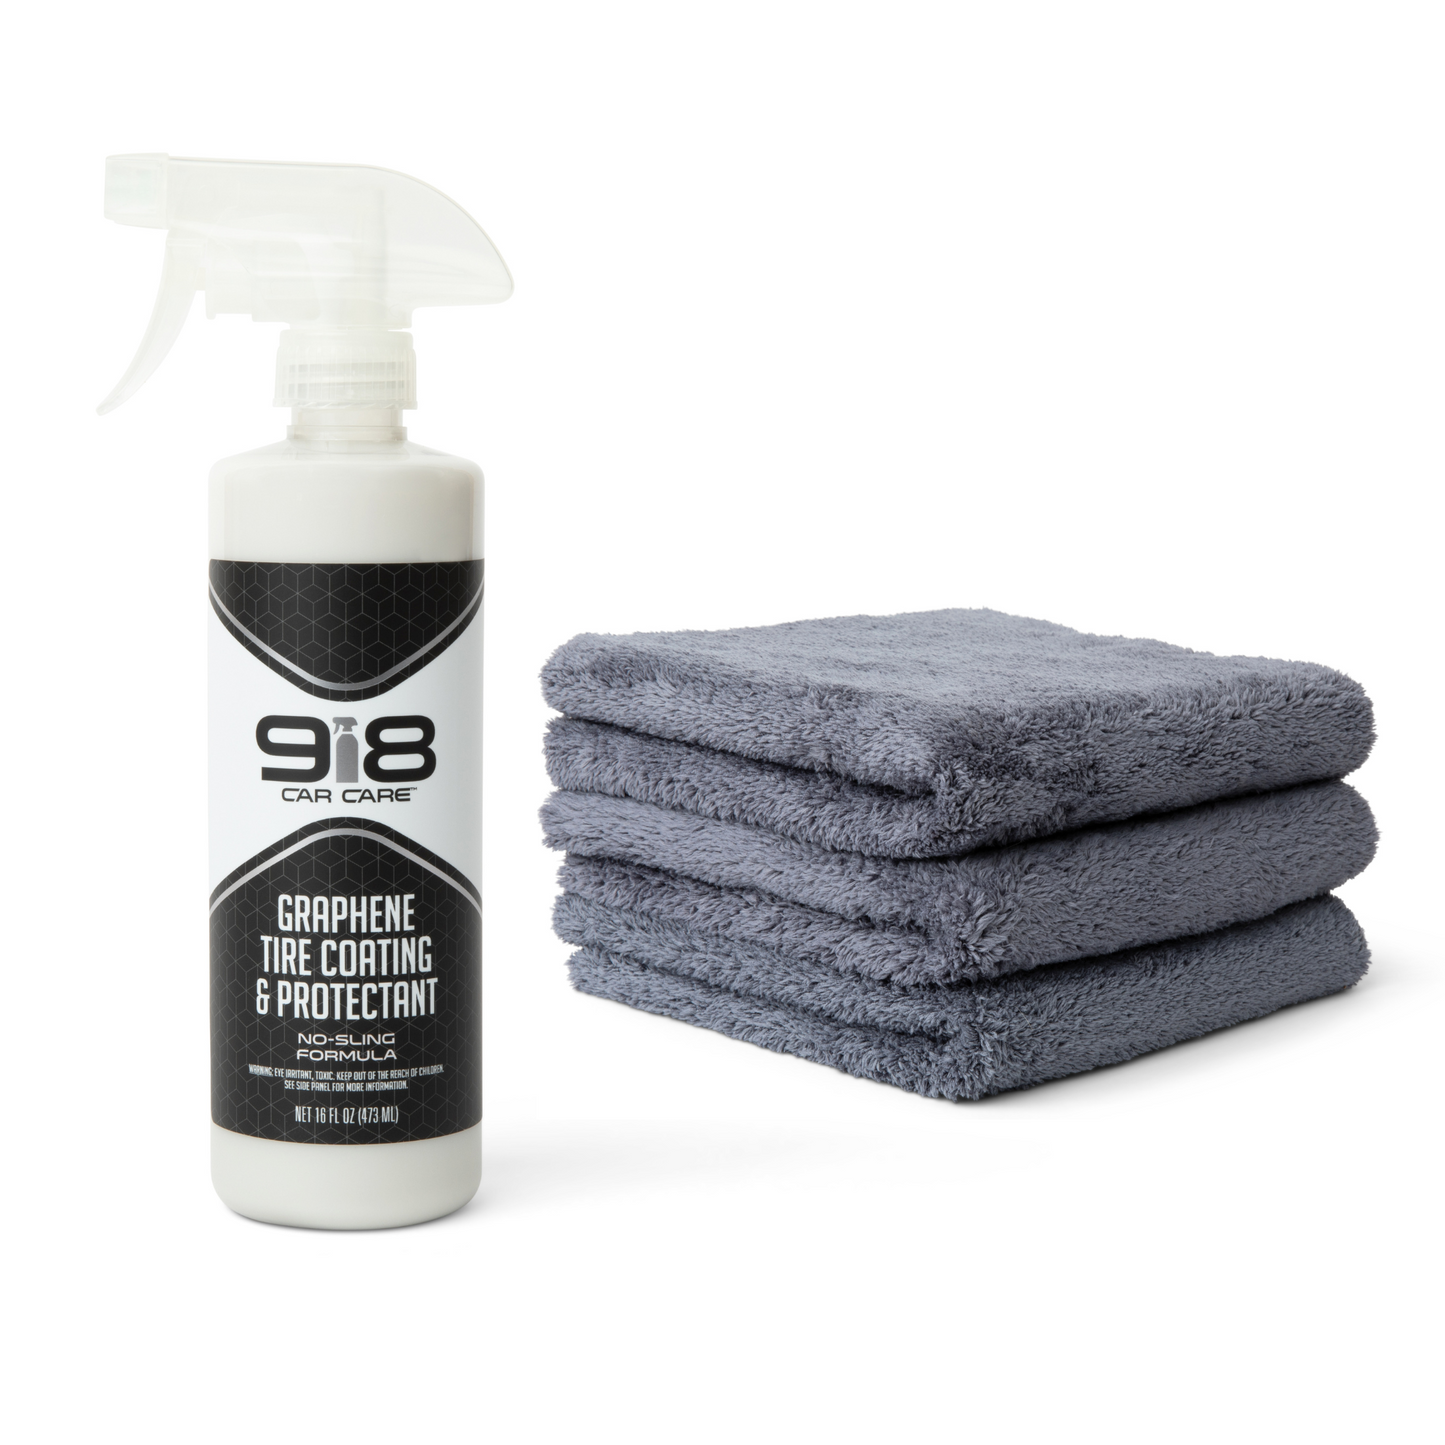 Graphene Tire Coating & Protectant - Towel Combo